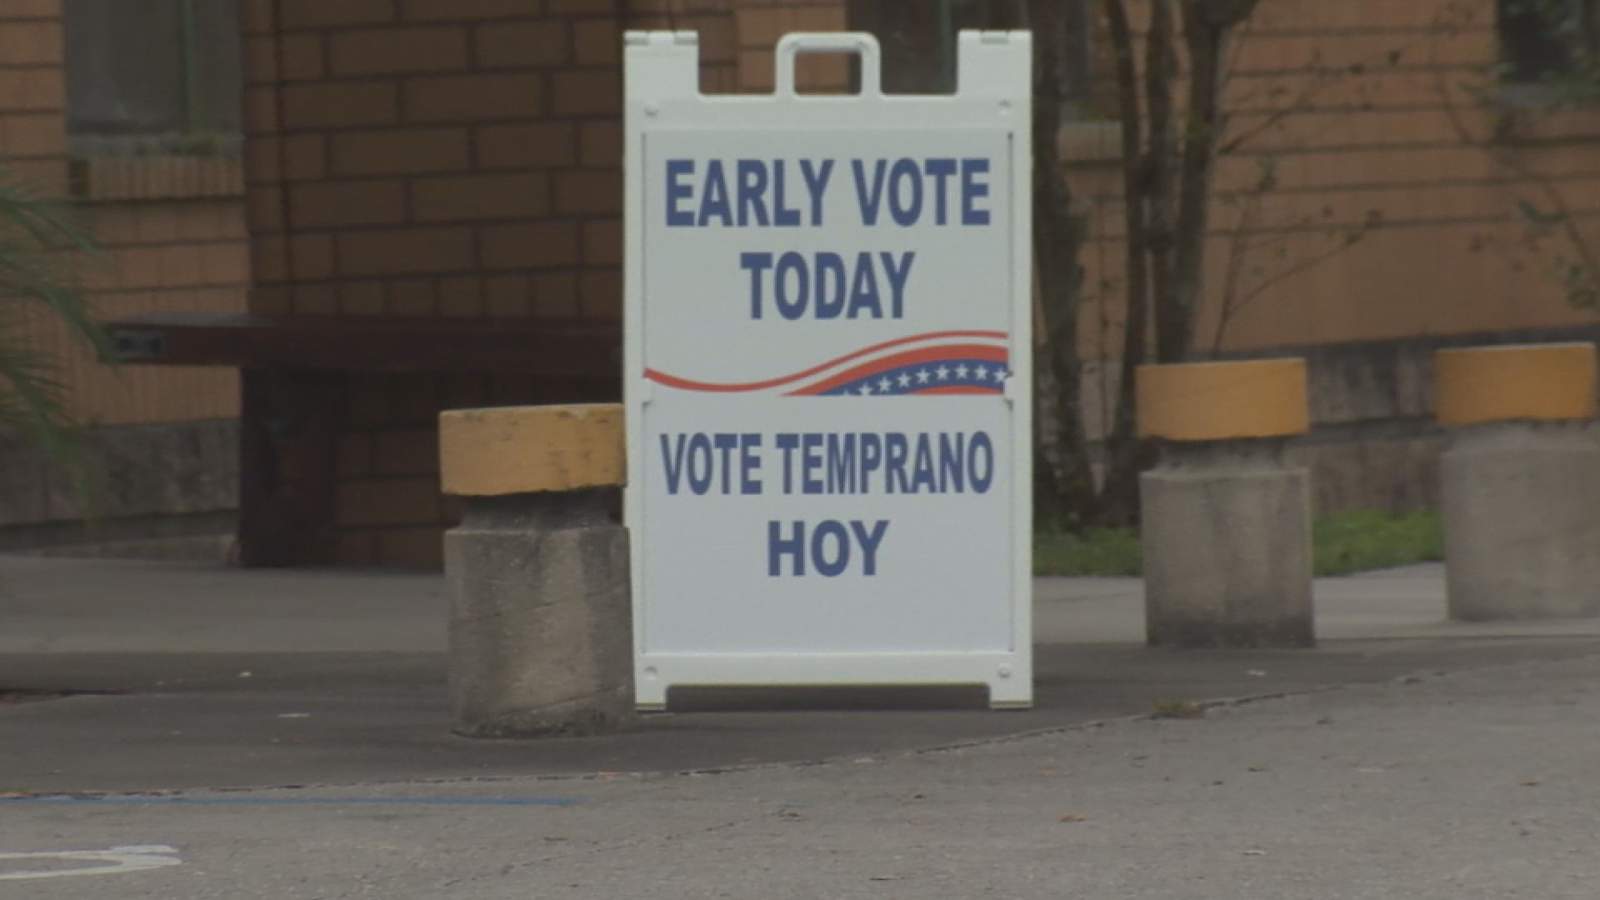 Window to vote early in Florida narrows